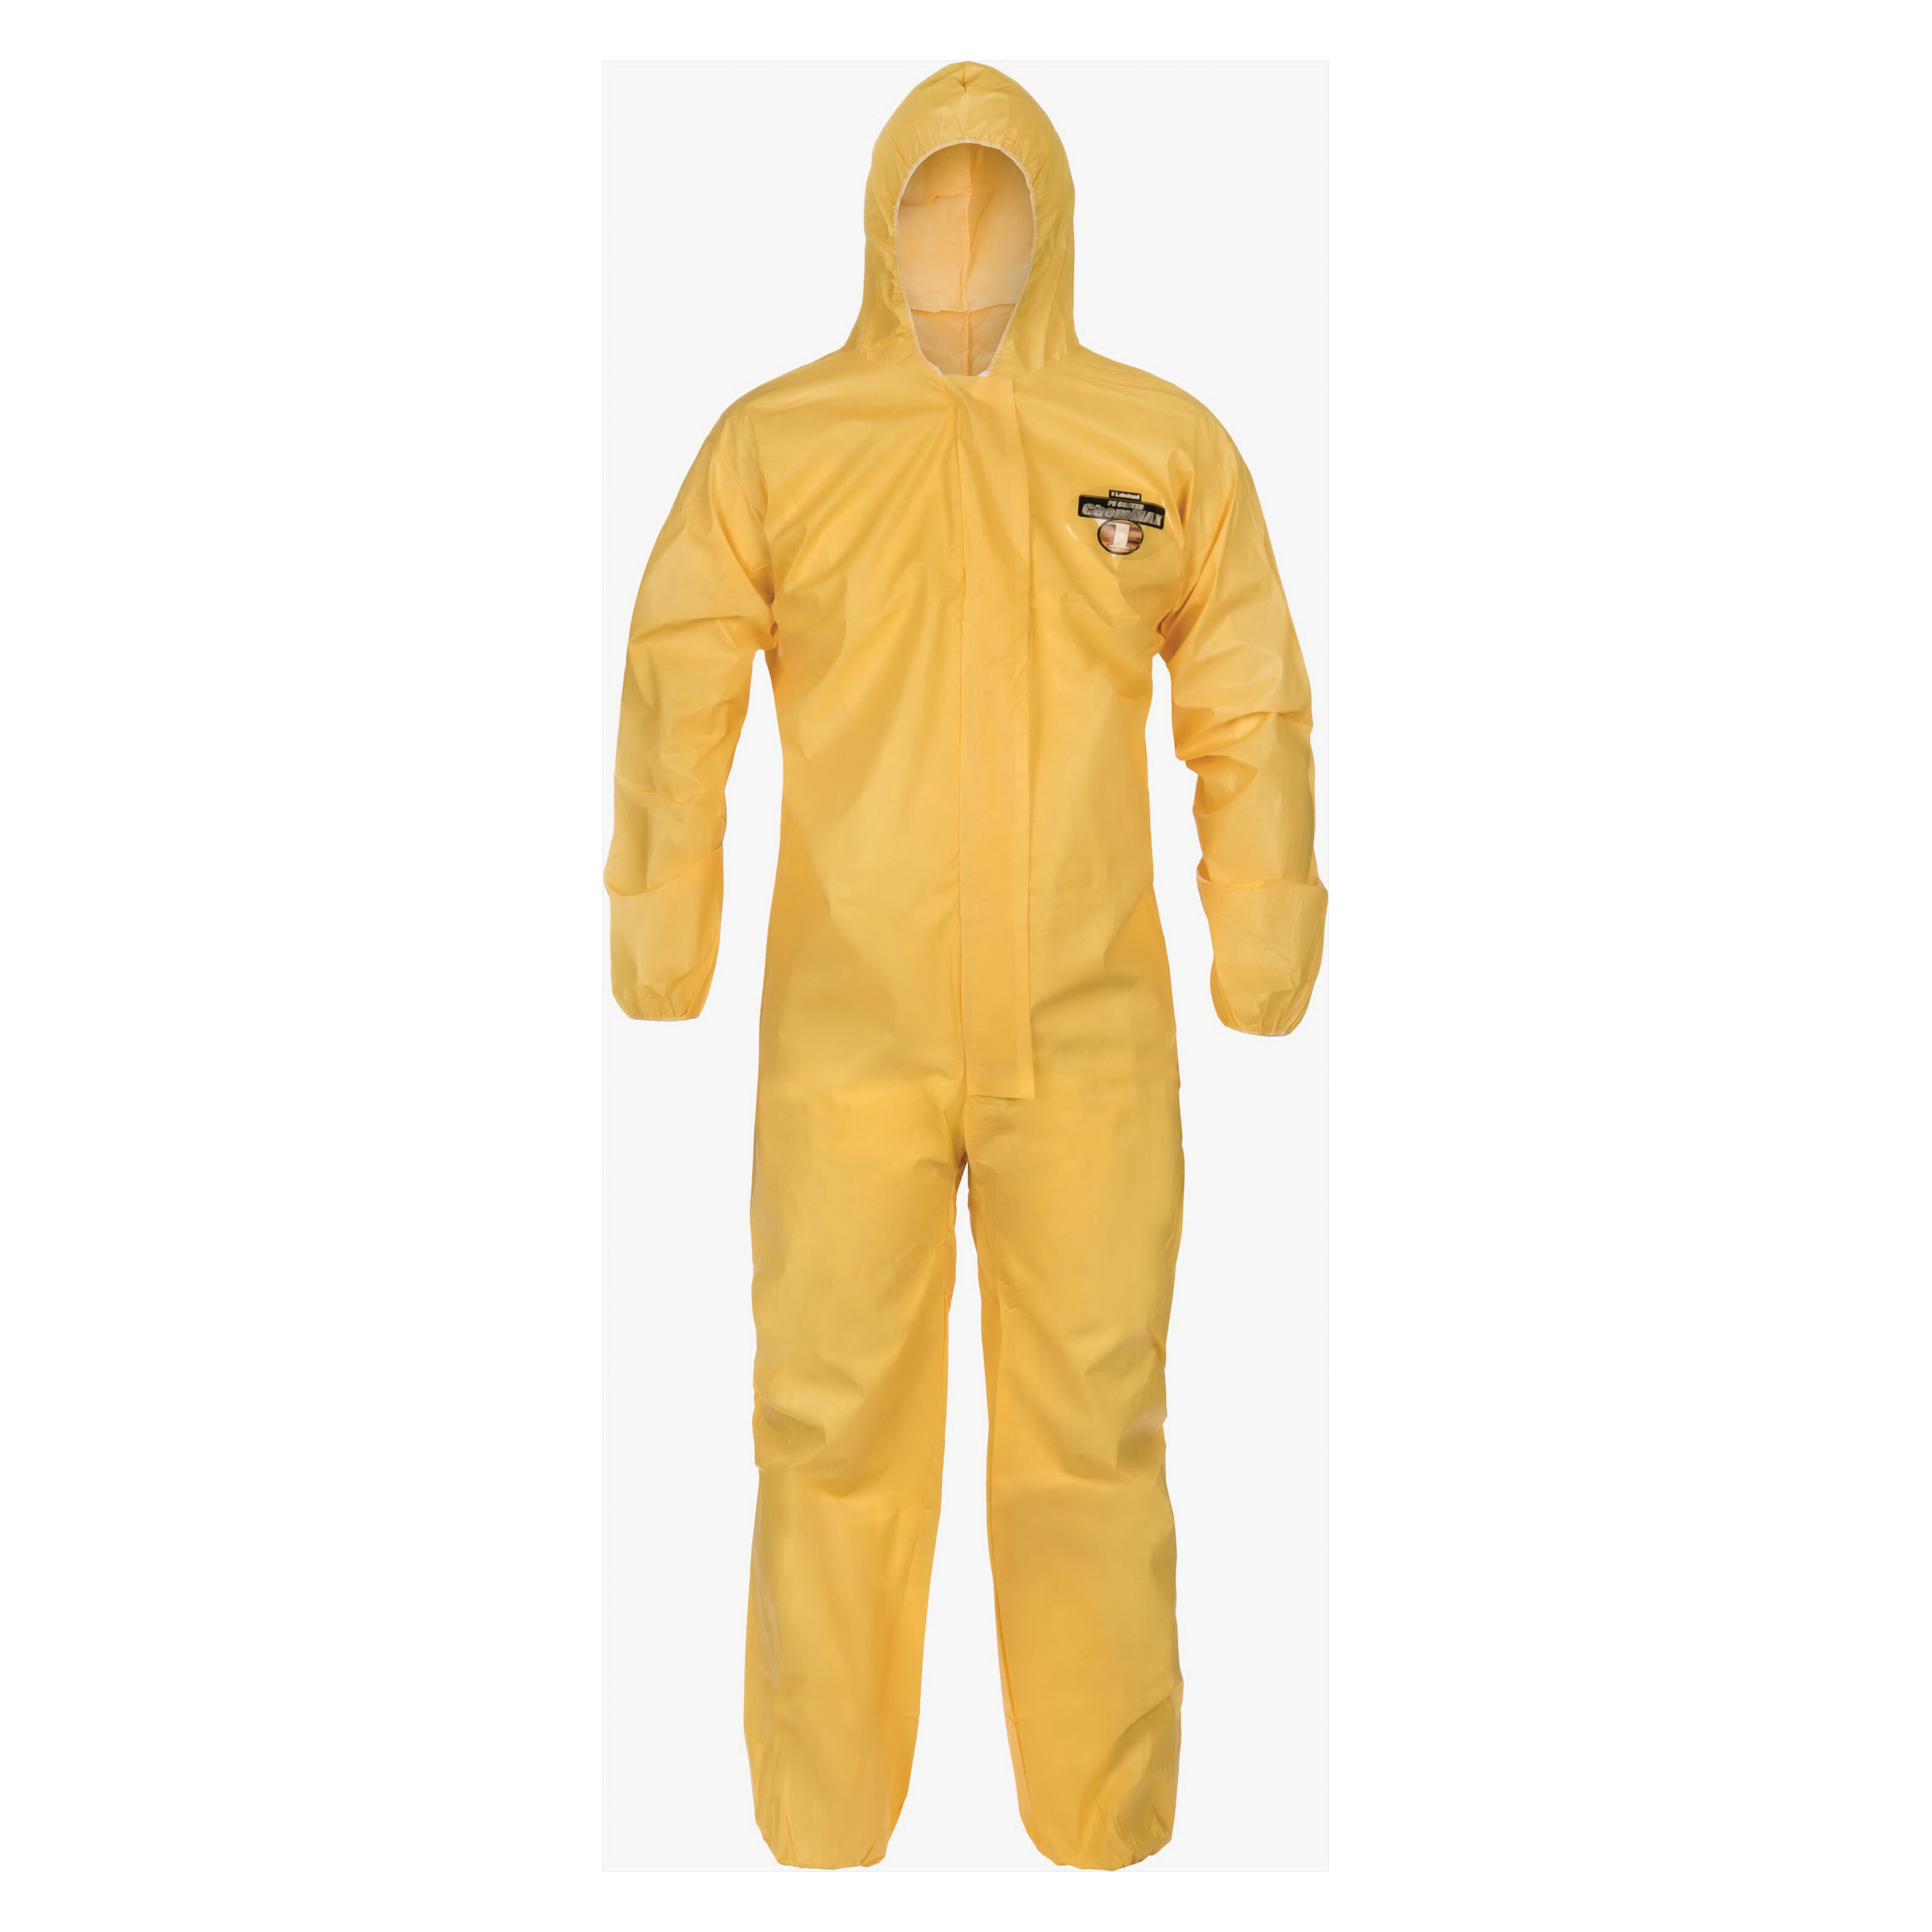 Lakeland® C2B417-XL Protective Coverall, XL, White, ChemMax® 2 (Spunbond Non-Woven), 48 to 50 in Chest, 29 in L Inseam